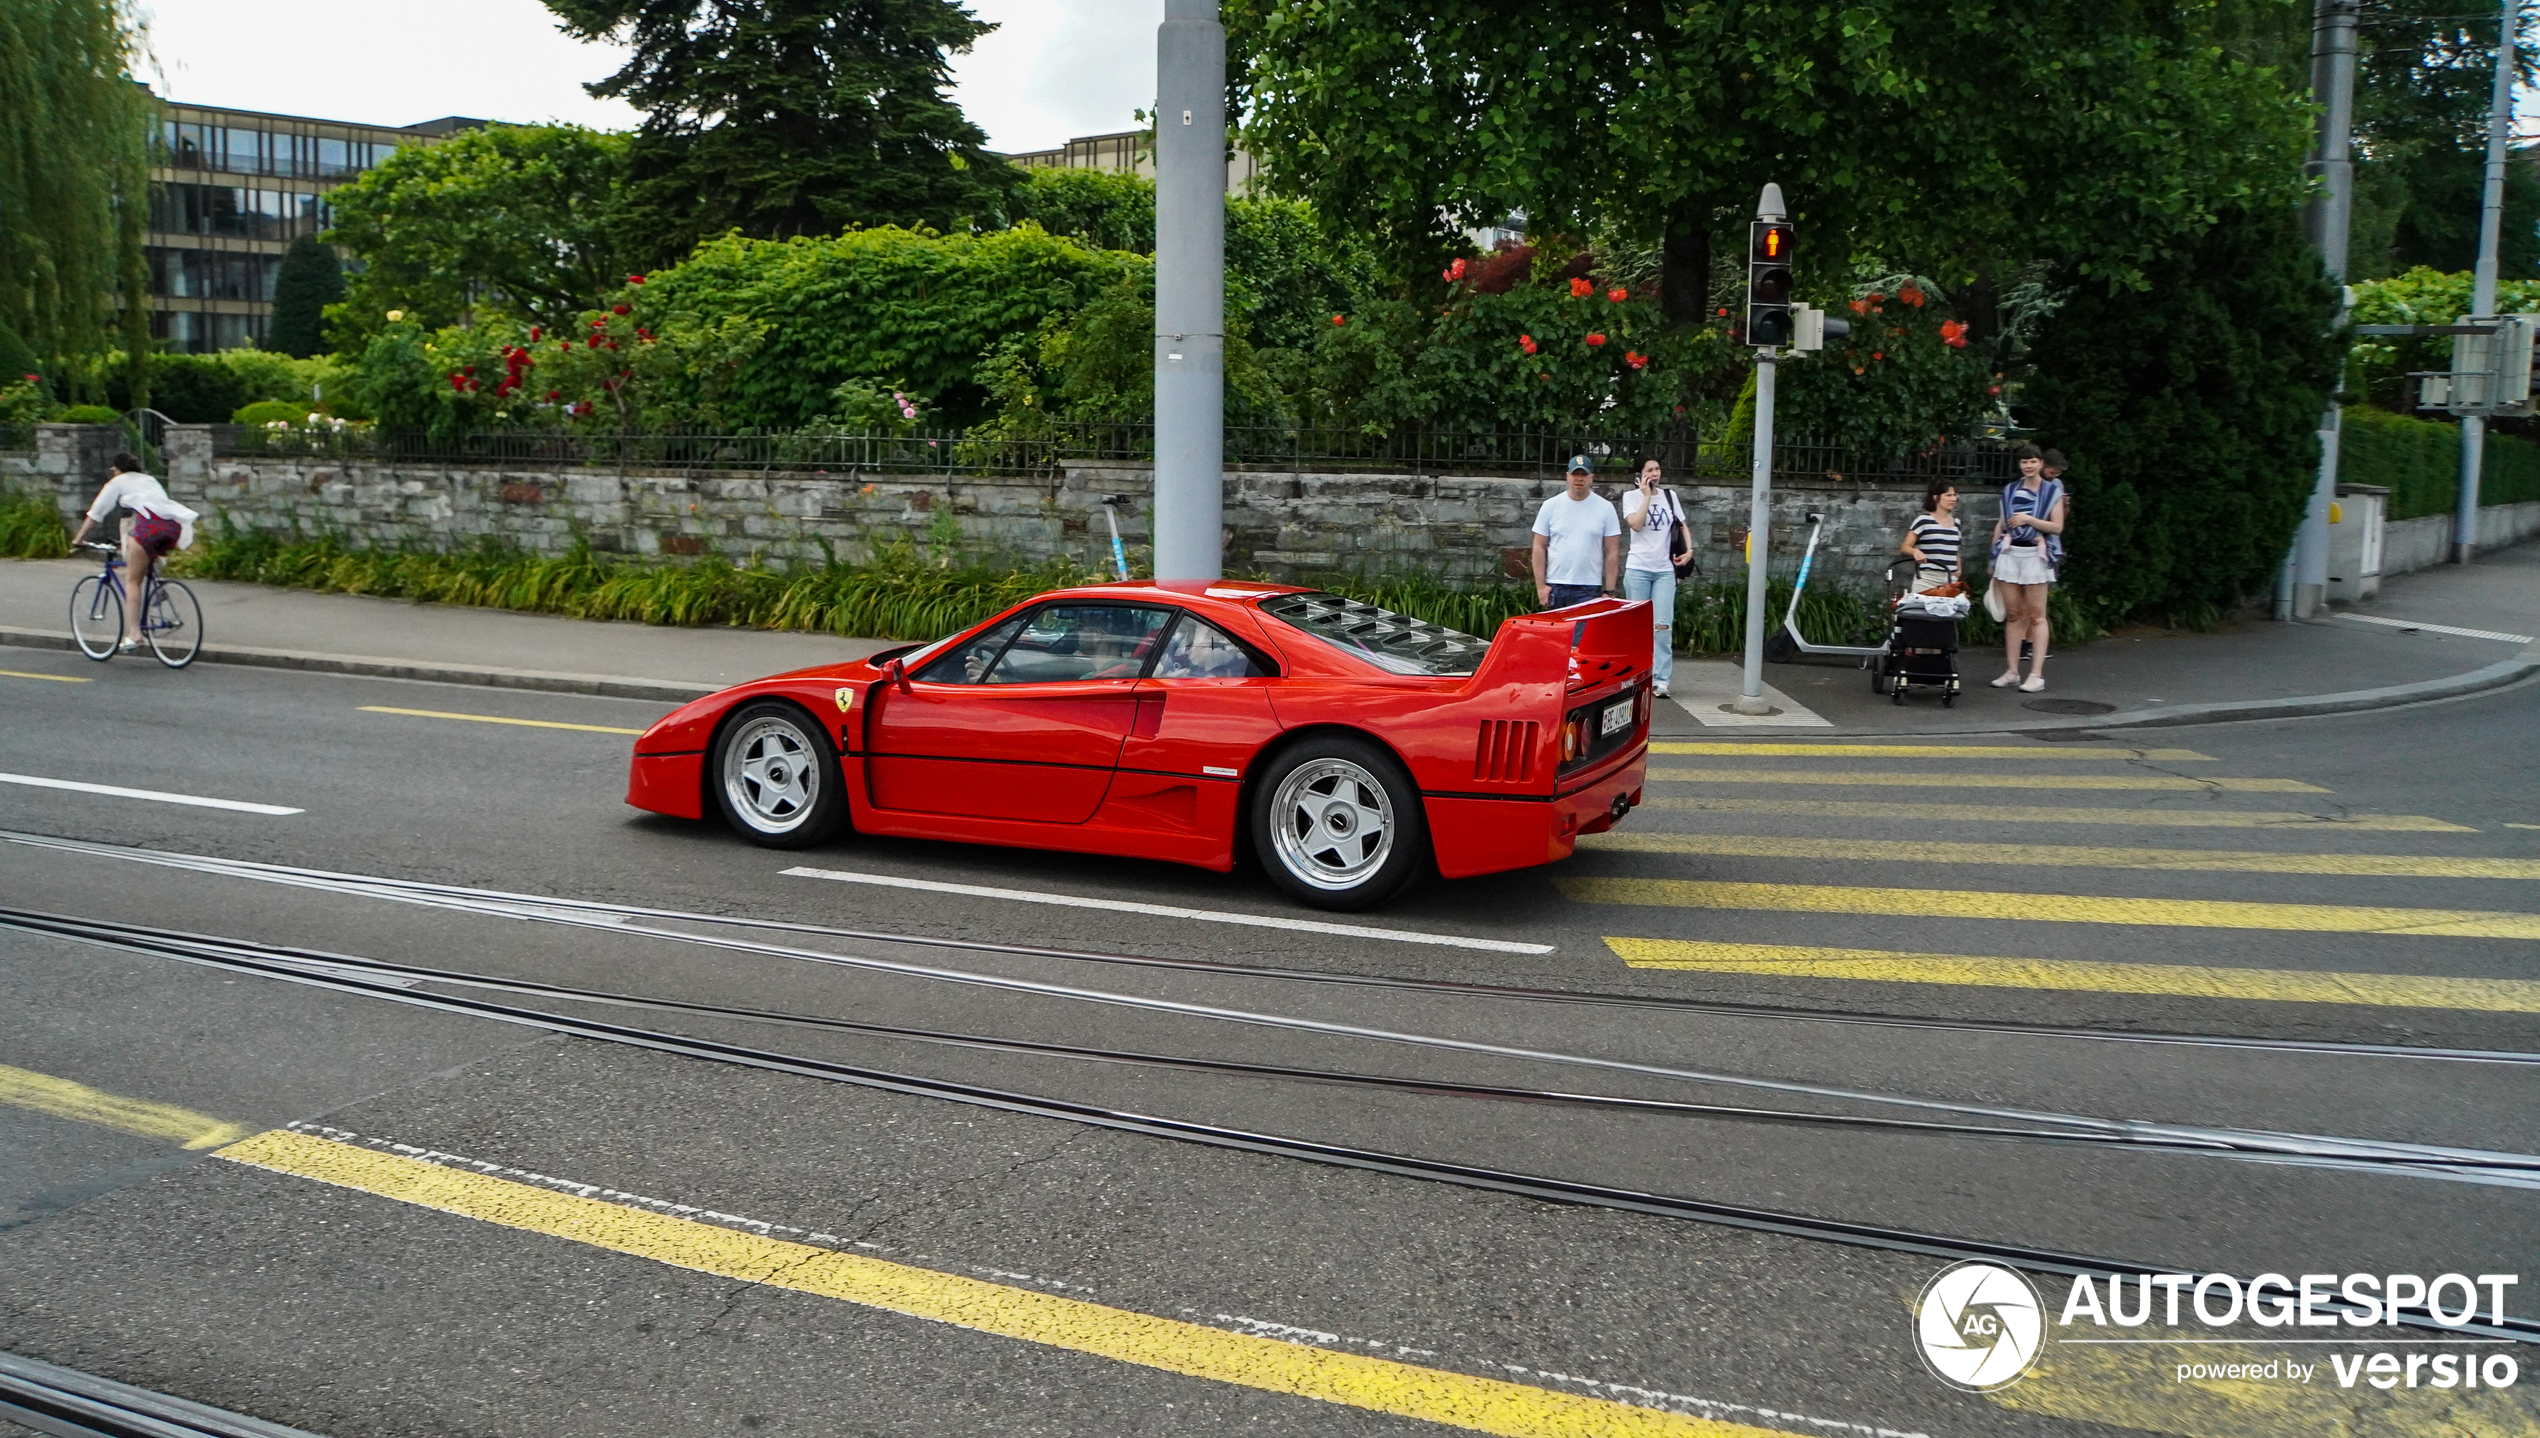 Another F40 shows up in Zürich